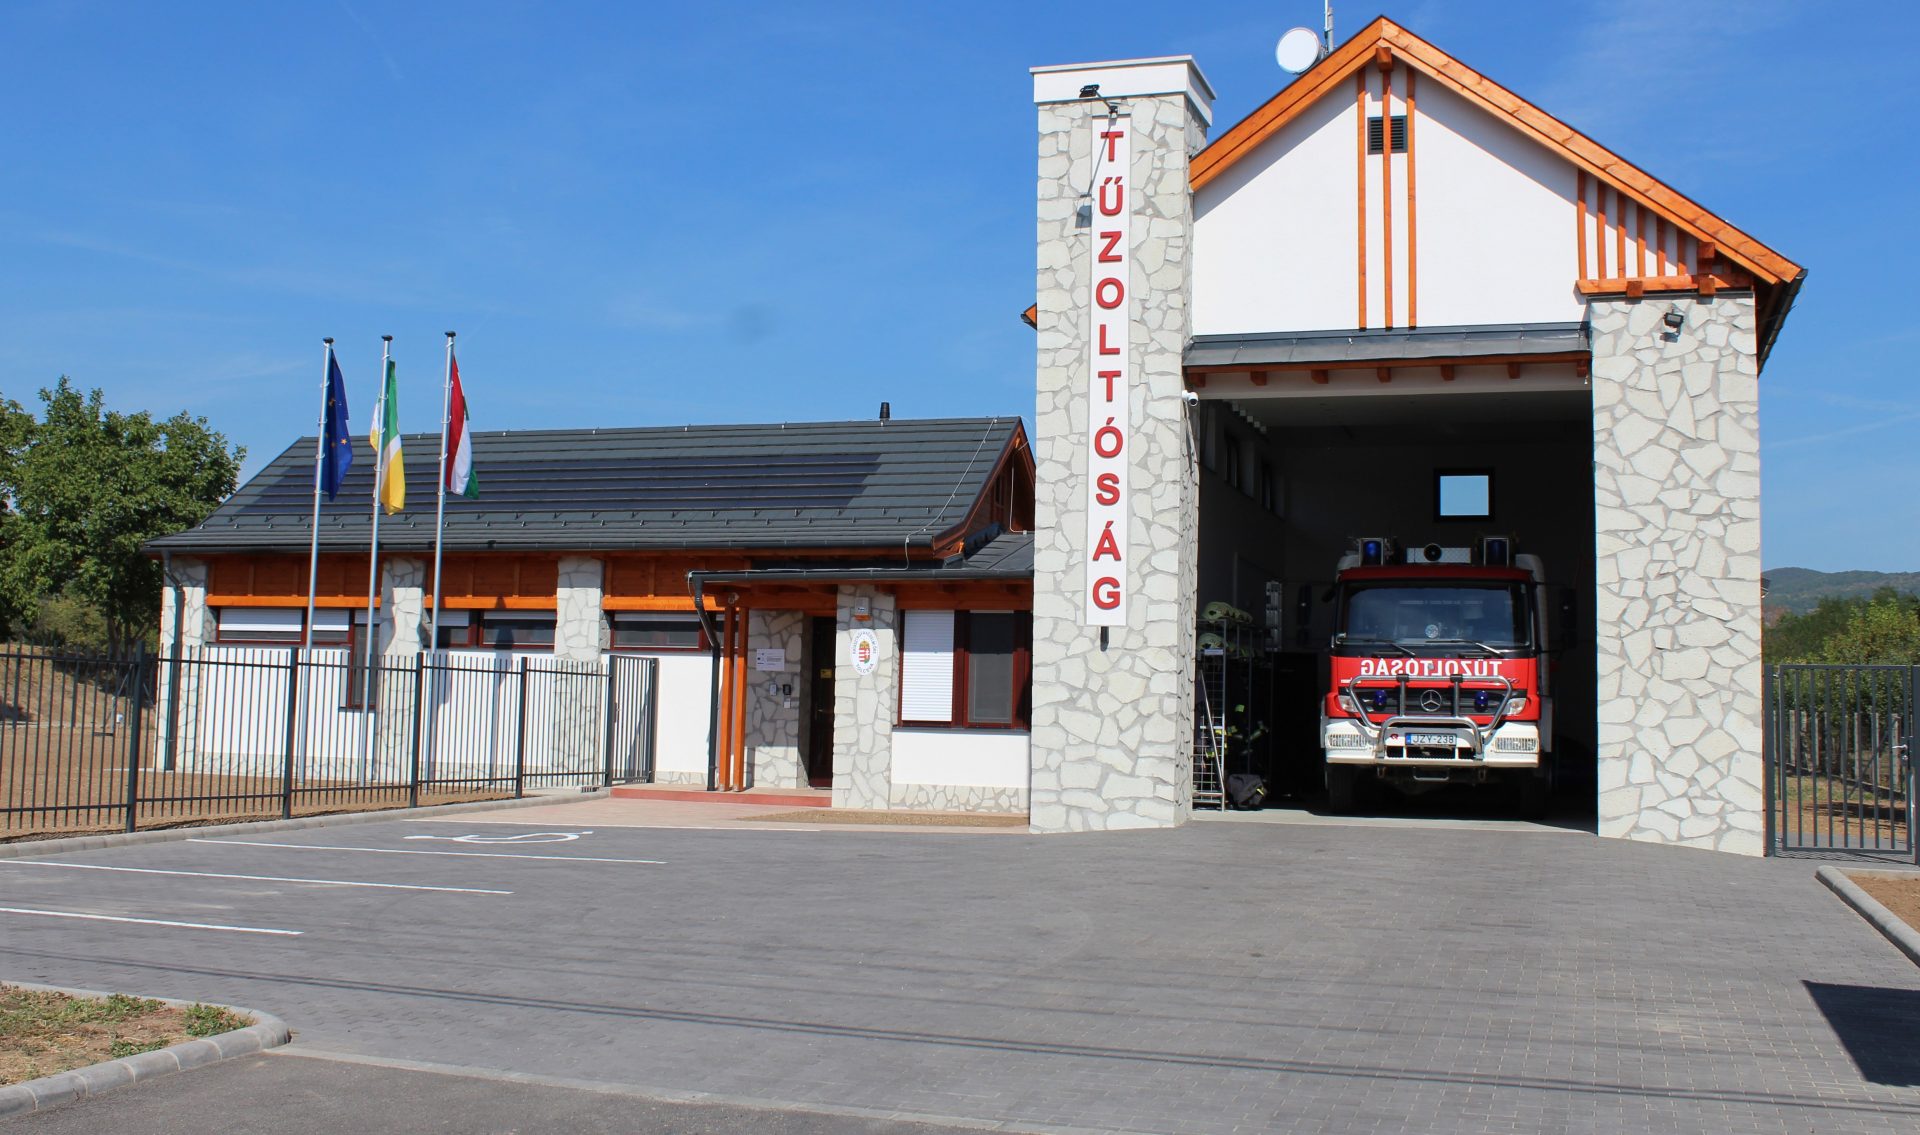 Disaster management stations were built in Tolcsva and Villány